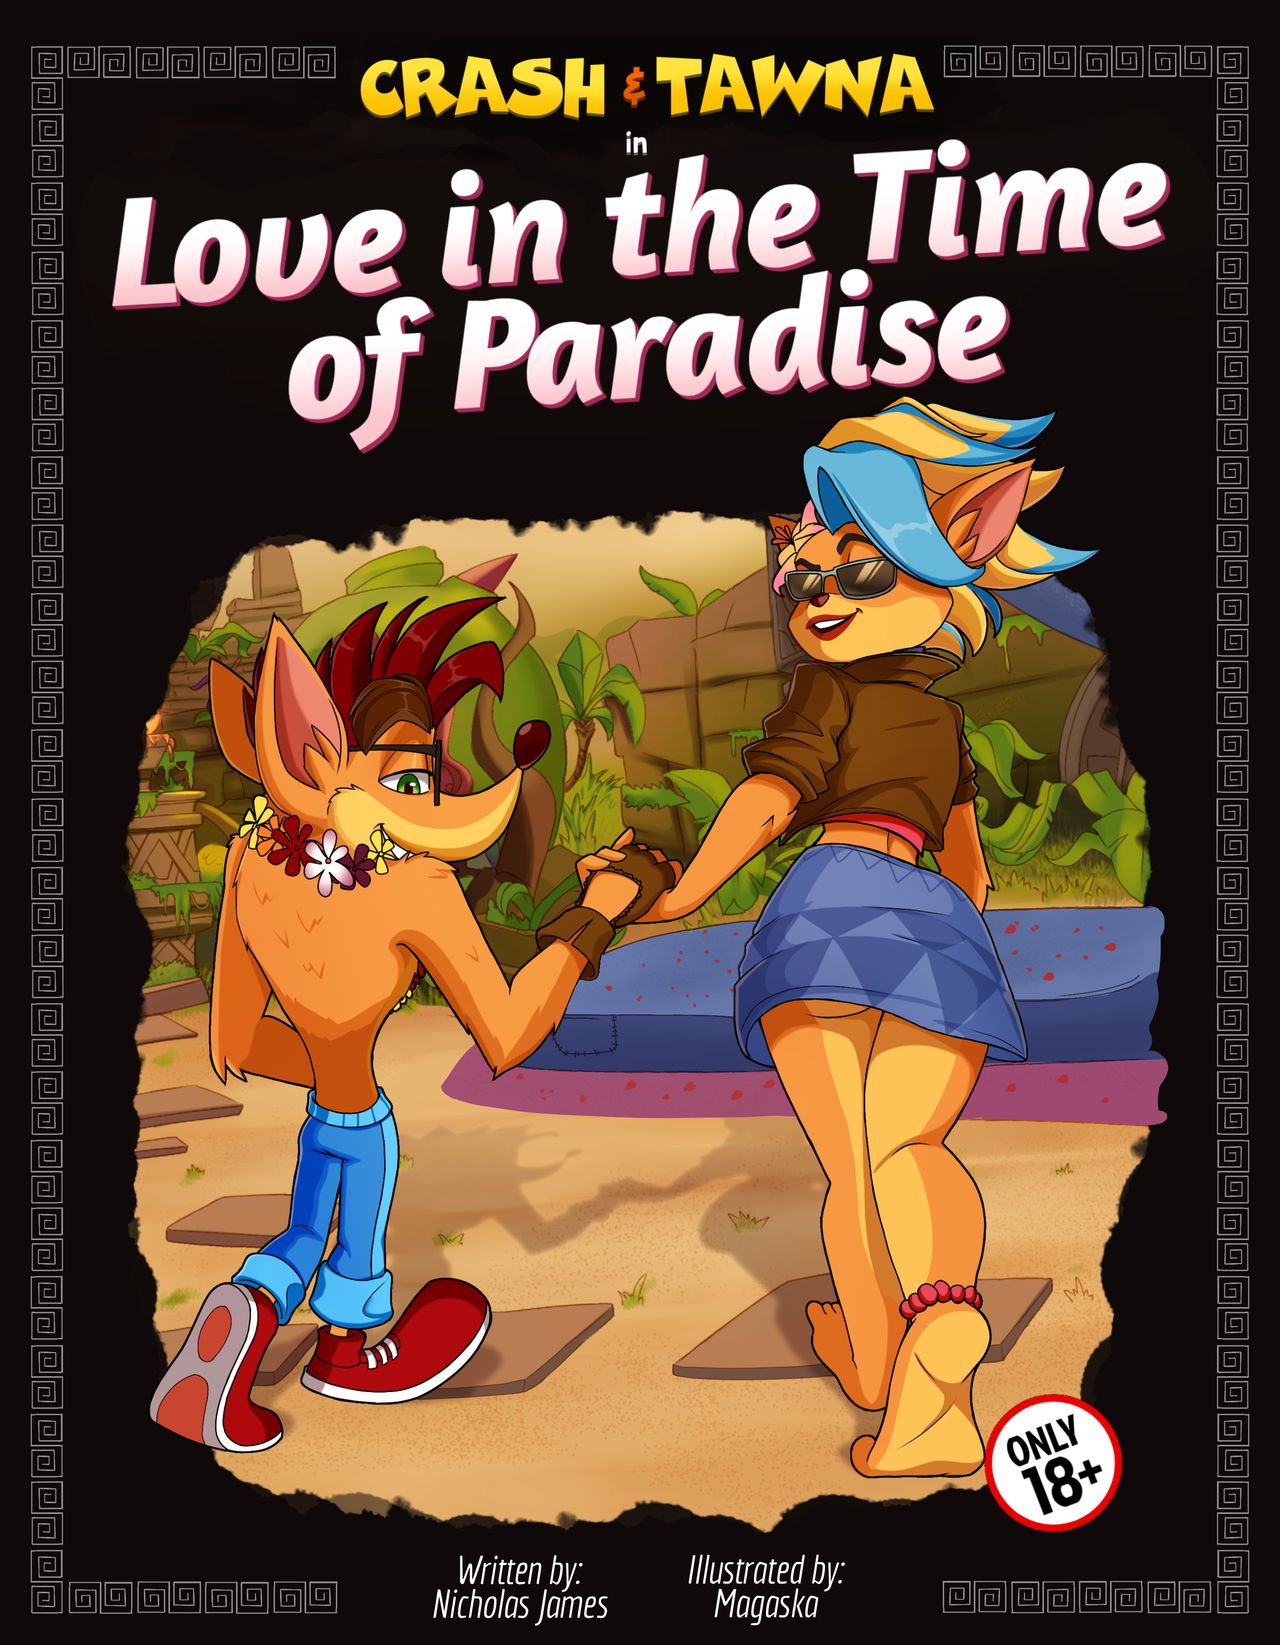 Love in the time of paradise - Crash Bandicoot by Magaska19